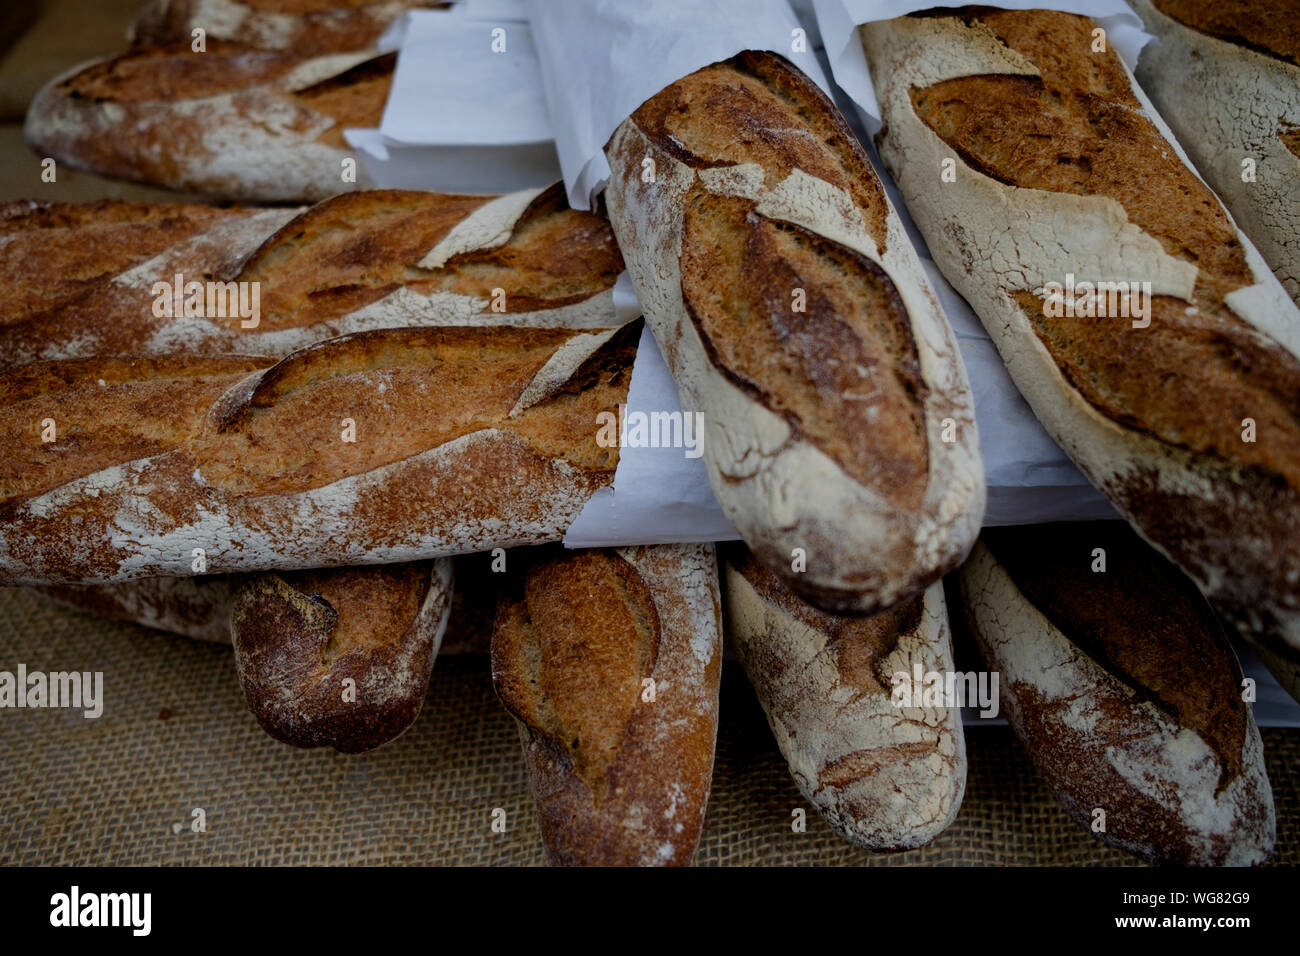 Loaves Of Bread On Burlap Stock Photo